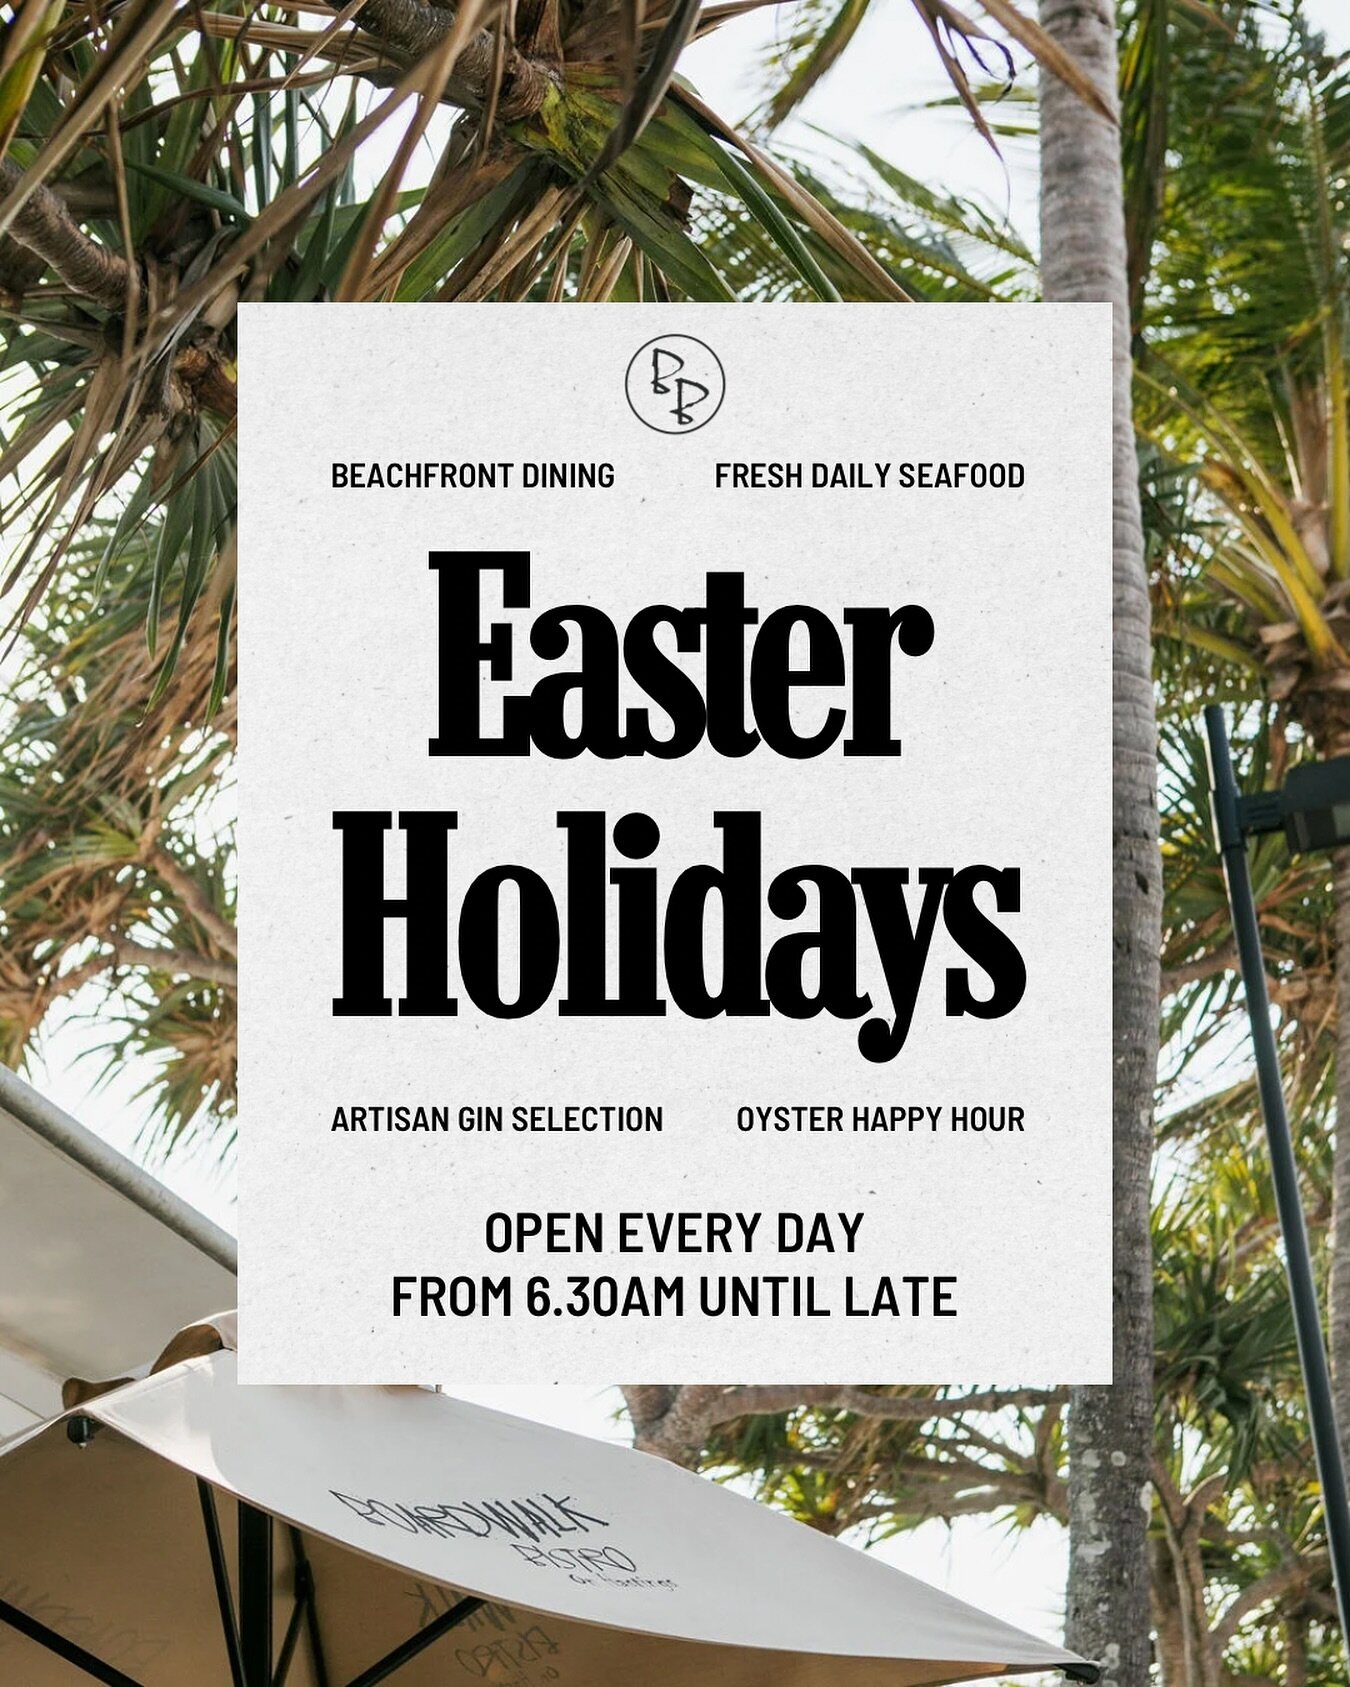 Ready to make the most of the upcoming Easter school holidays? 🐣
Don&rsquo;t miss out on securing your table for unforgettable family moments! Booking ahead is essential to guarantee your spot during this busy season.
 
Reserve your table via the li